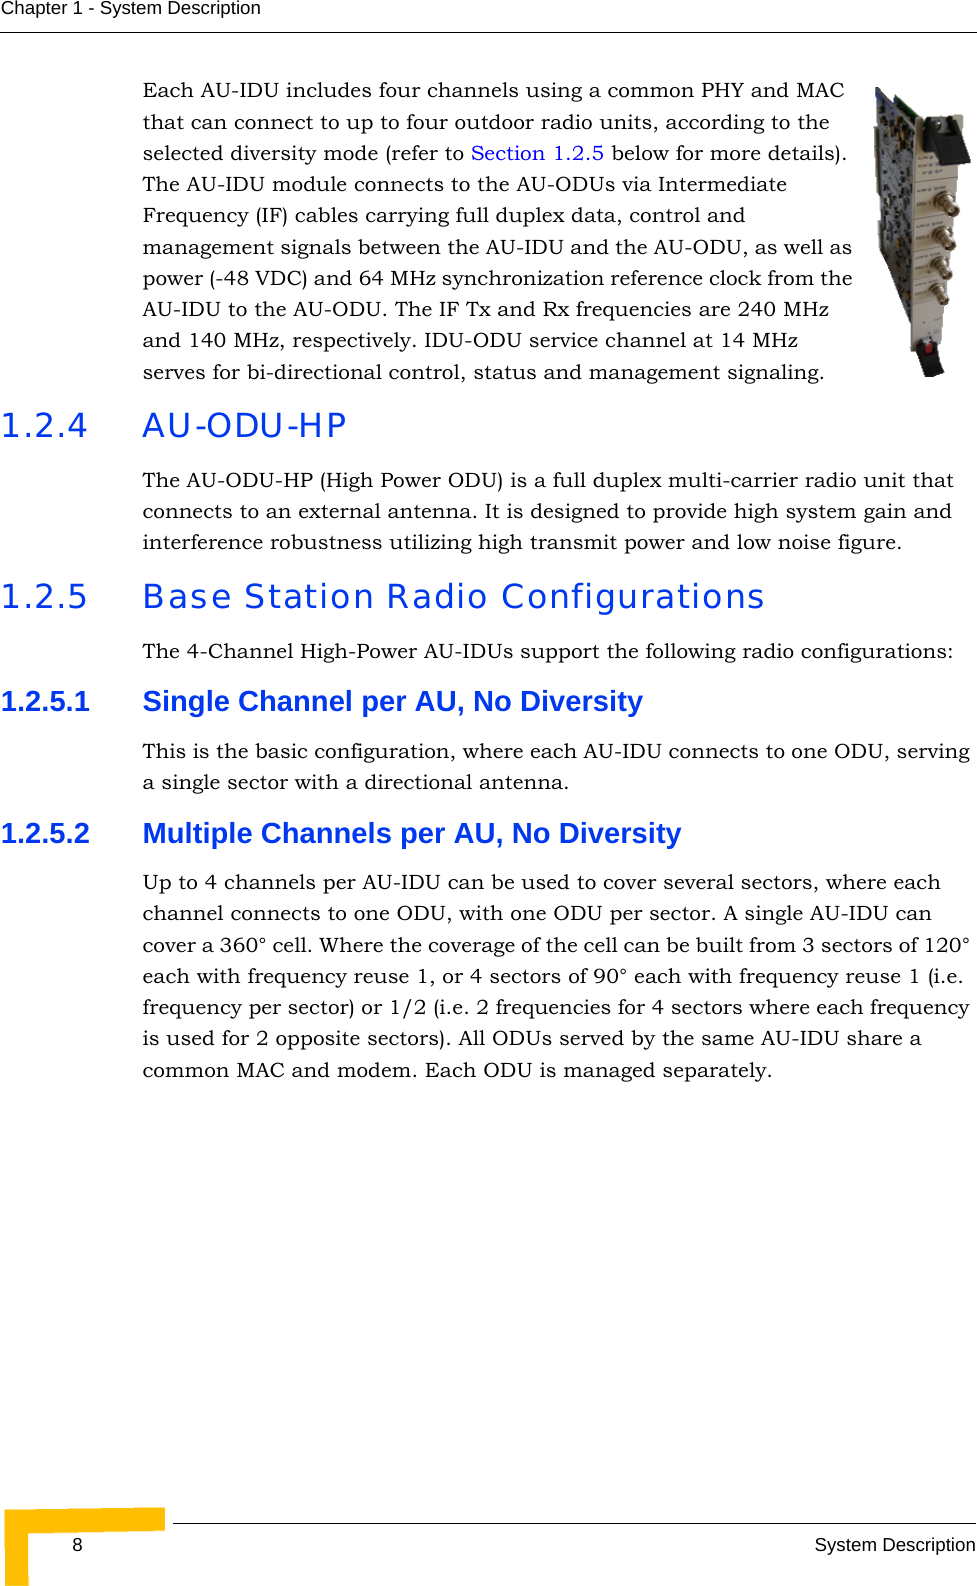 8System DescriptionChapter 1 - System DescriptionEach AU-IDU includes four channels using a common PHY and MAC that can connect to up to four outdoor radio units, according to the selected diversity mode (refer to Section 1.2.5 below for more details). The AU-IDU module connects to the AU-ODUs via Intermediate Frequency (IF) cables carrying full duplex data, control and management signals between the AU-IDU and the AU-ODU, as well as power (-48 VDC) and 64 MHz synchronization reference clock from the AU-IDU to the AU-ODU. The IF Tx and Rx frequencies are 240 MHz and 140 MHz, respectively. IDU-ODU service channel at 14 MHz serves for bi-directional control, status and management signaling.1.2.4 AU-ODU-HPThe AU-ODU-HP (High Power ODU) is a full duplex multi-carrier radio unit that connects to an external antenna. It is designed to provide high system gain and interference robustness utilizing high transmit power and low noise figure.1.2.5 Base Station Radio ConfigurationsThe 4-Channel High-Power AU-IDUs support the following radio configurations:1.2.5.1 Single Channel per AU, No DiversityThis is the basic configuration, where each AU-IDU connects to one ODU, serving a single sector with a directional antenna.1.2.5.2 Multiple Channels per AU, No DiversityUp to 4 channels per AU-IDU can be used to cover several sectors, where each channel connects to one ODU, with one ODU per sector. A single AU-IDU can cover a 360° cell. Where the coverage of the cell can be built from 3 sectors of 120° each with frequency reuse 1, or 4 sectors of 90° each with frequency reuse 1 (i.e. frequency per sector) or 1/2 (i.e. 2 frequencies for 4 sectors where each frequency is used for 2 opposite sectors). All ODUs served by the same AU-IDU share a common MAC and modem. Each ODU is managed separately.